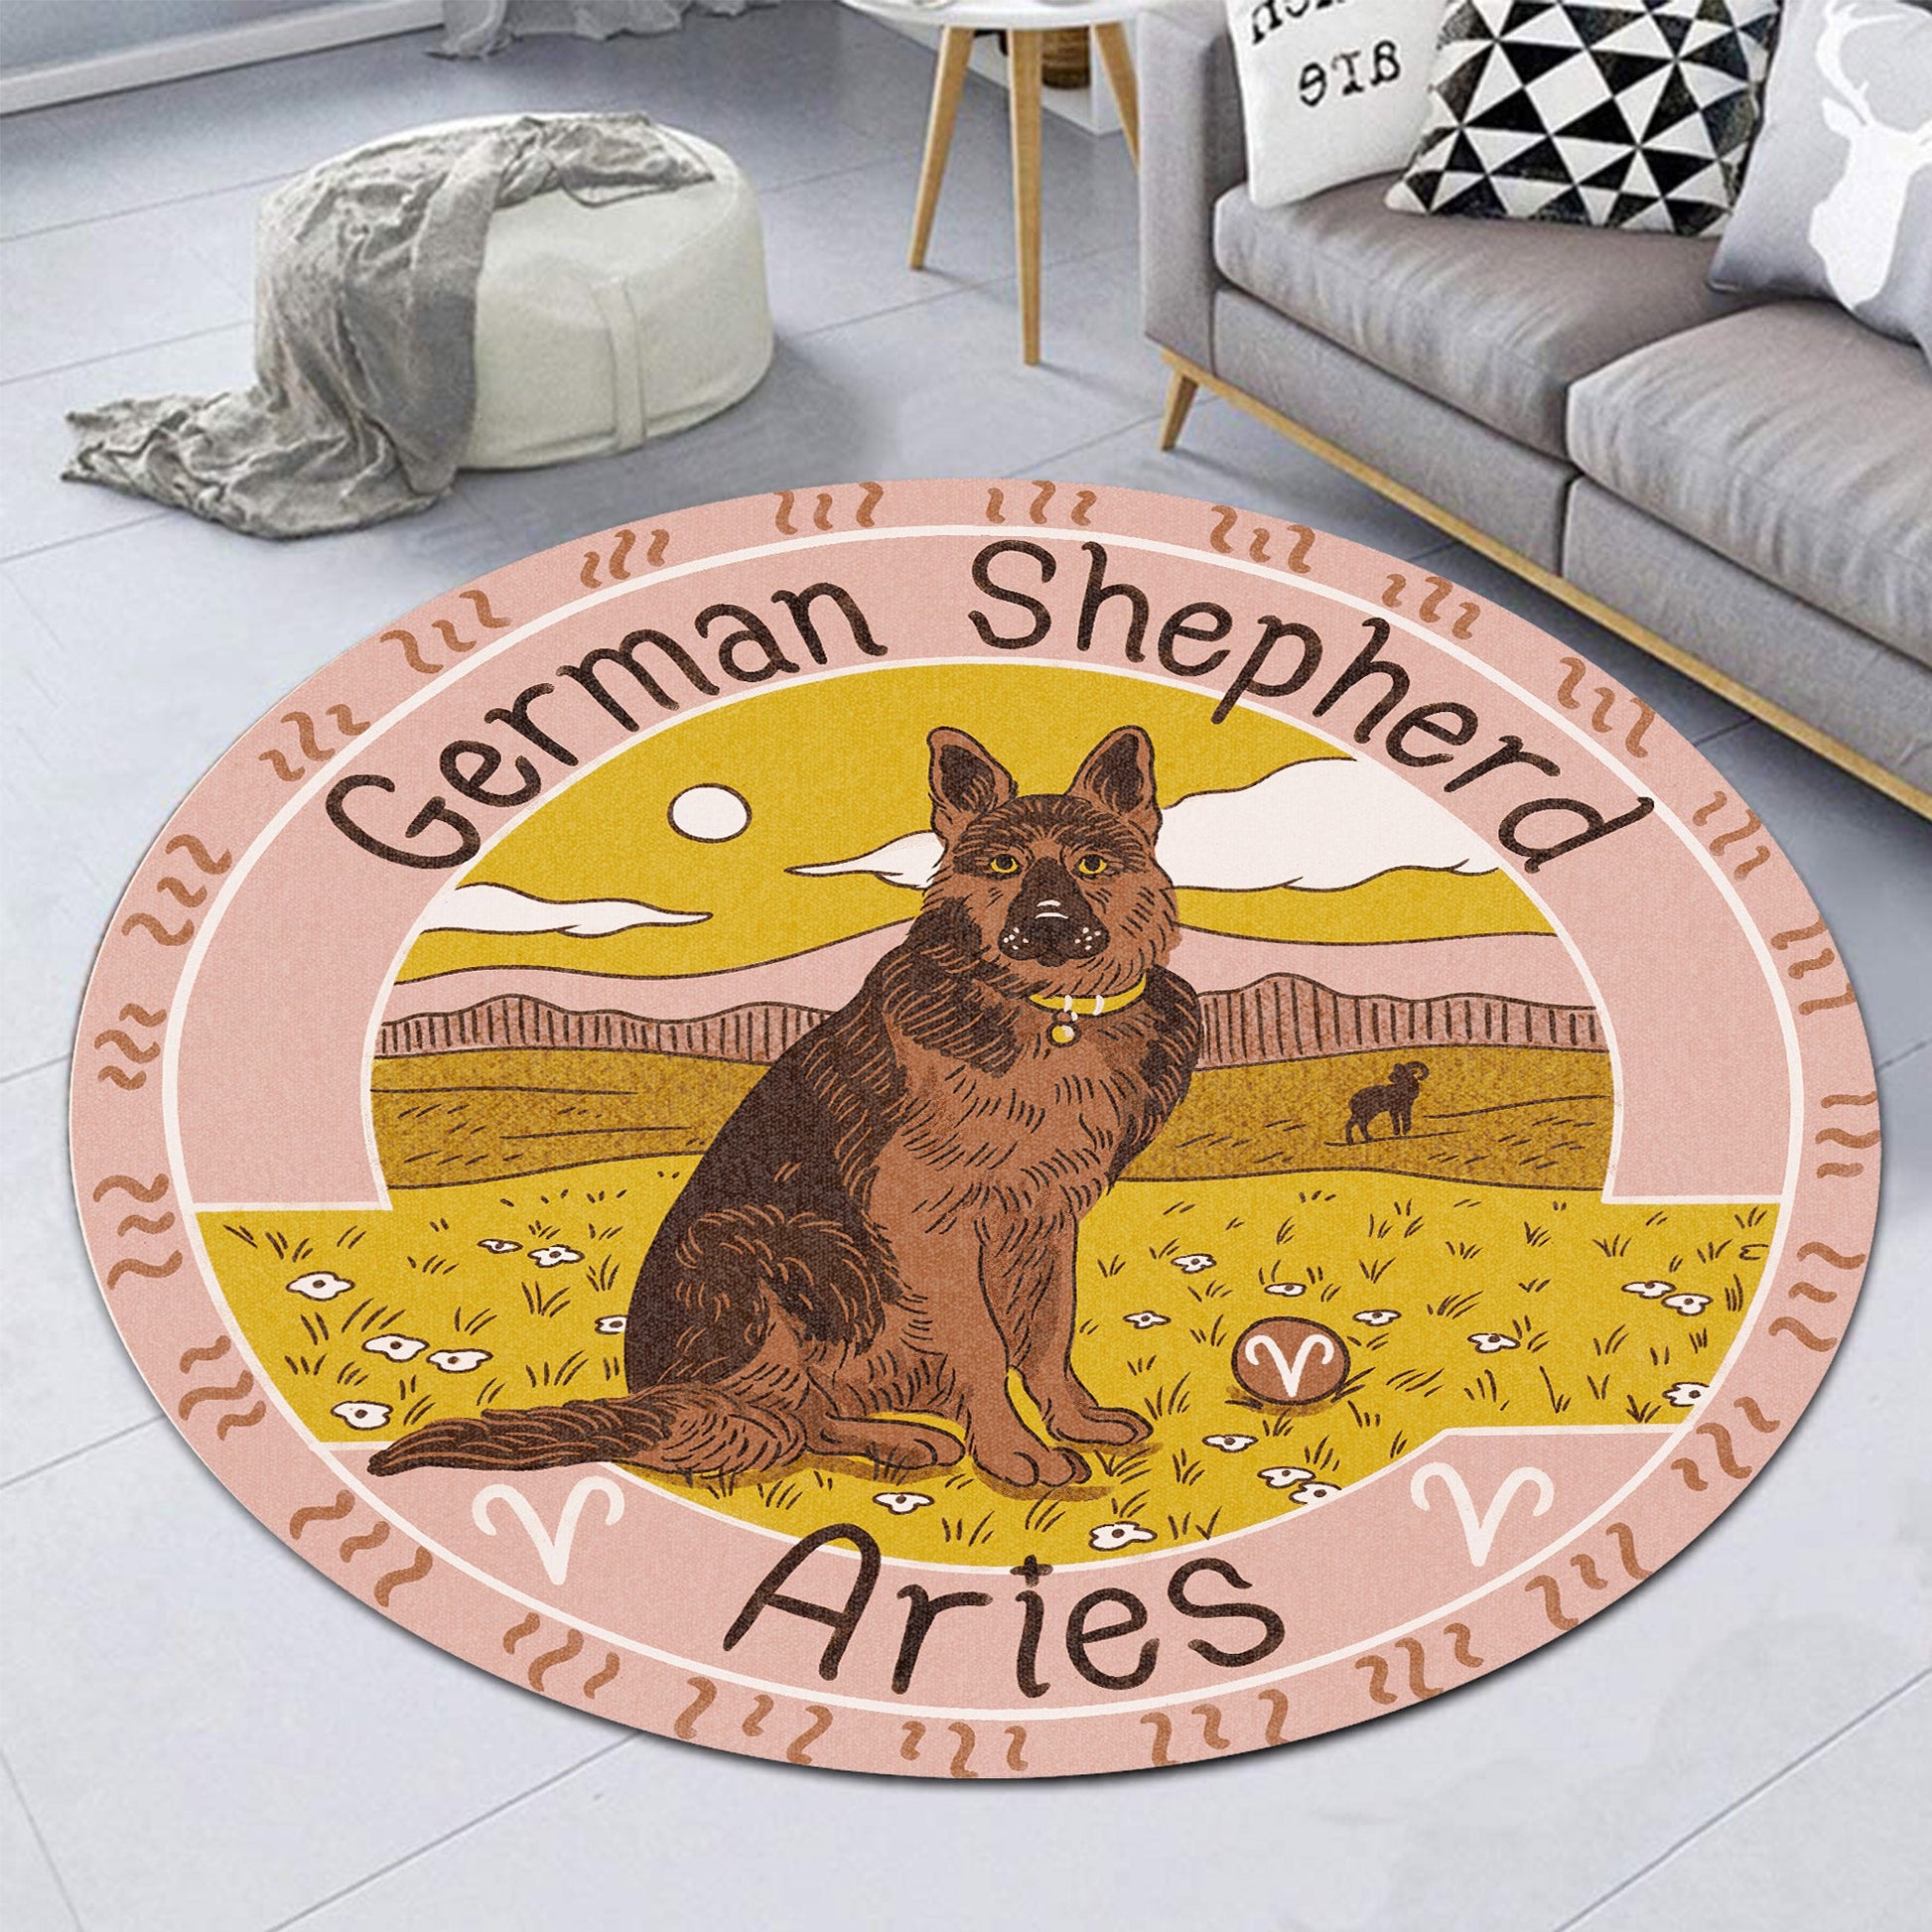 Puppy Carpet German Shepherd Dogs Rug Rectangle Rugs Washable Area